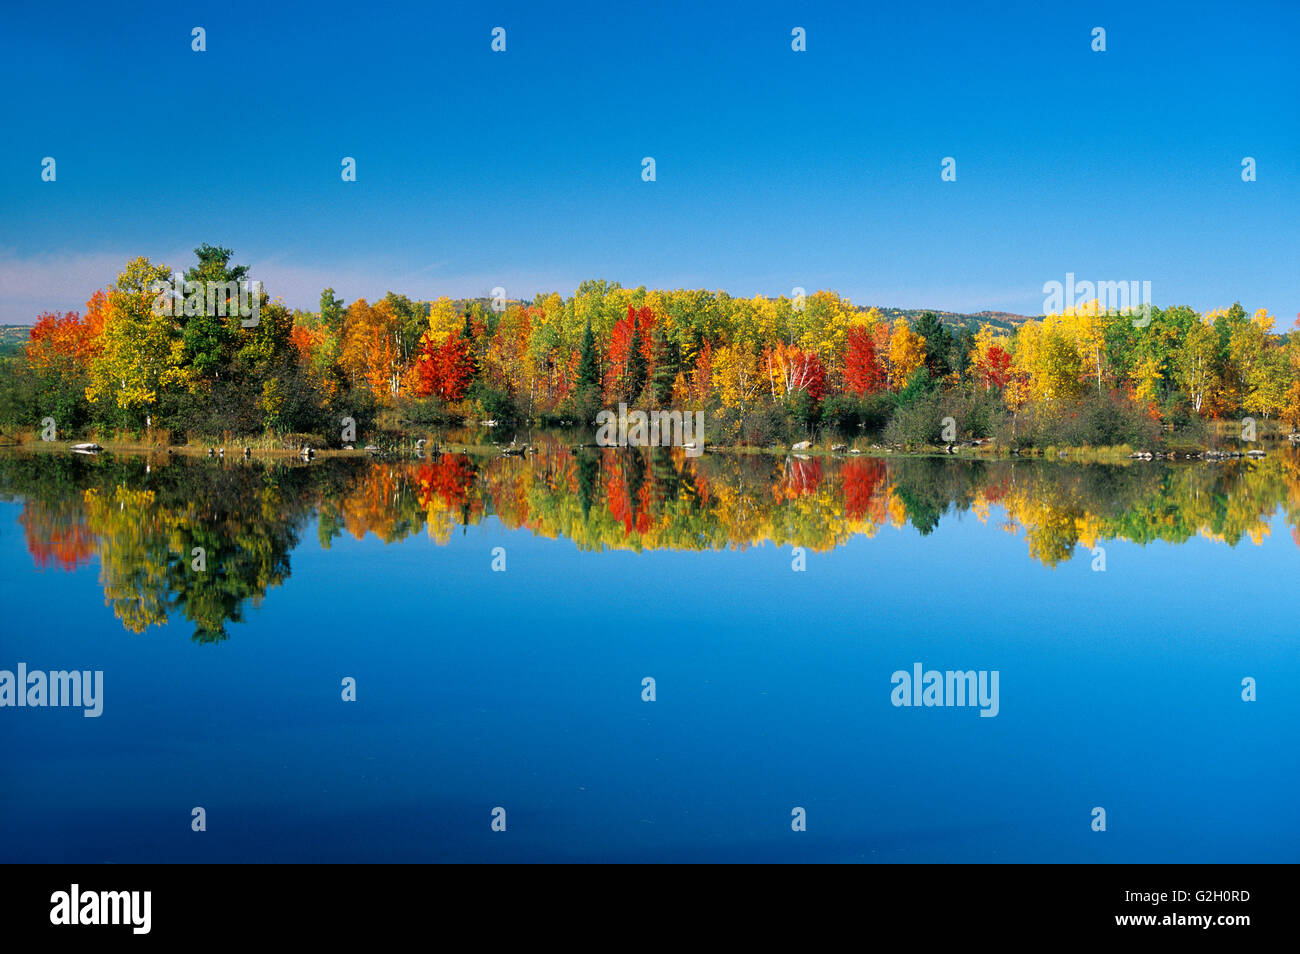 Ottawa River reflection in autumn colors Deux Rivieres Ontario Canada Stock Photo